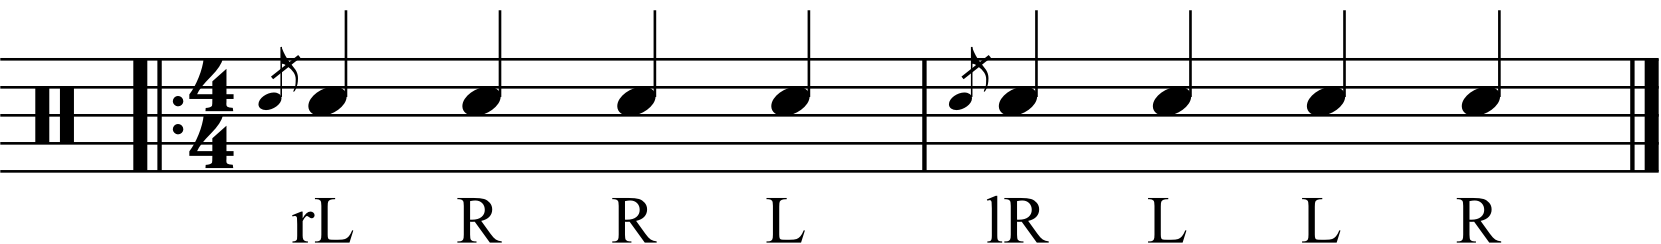 The Inverted Flamadiddle as quarter notes